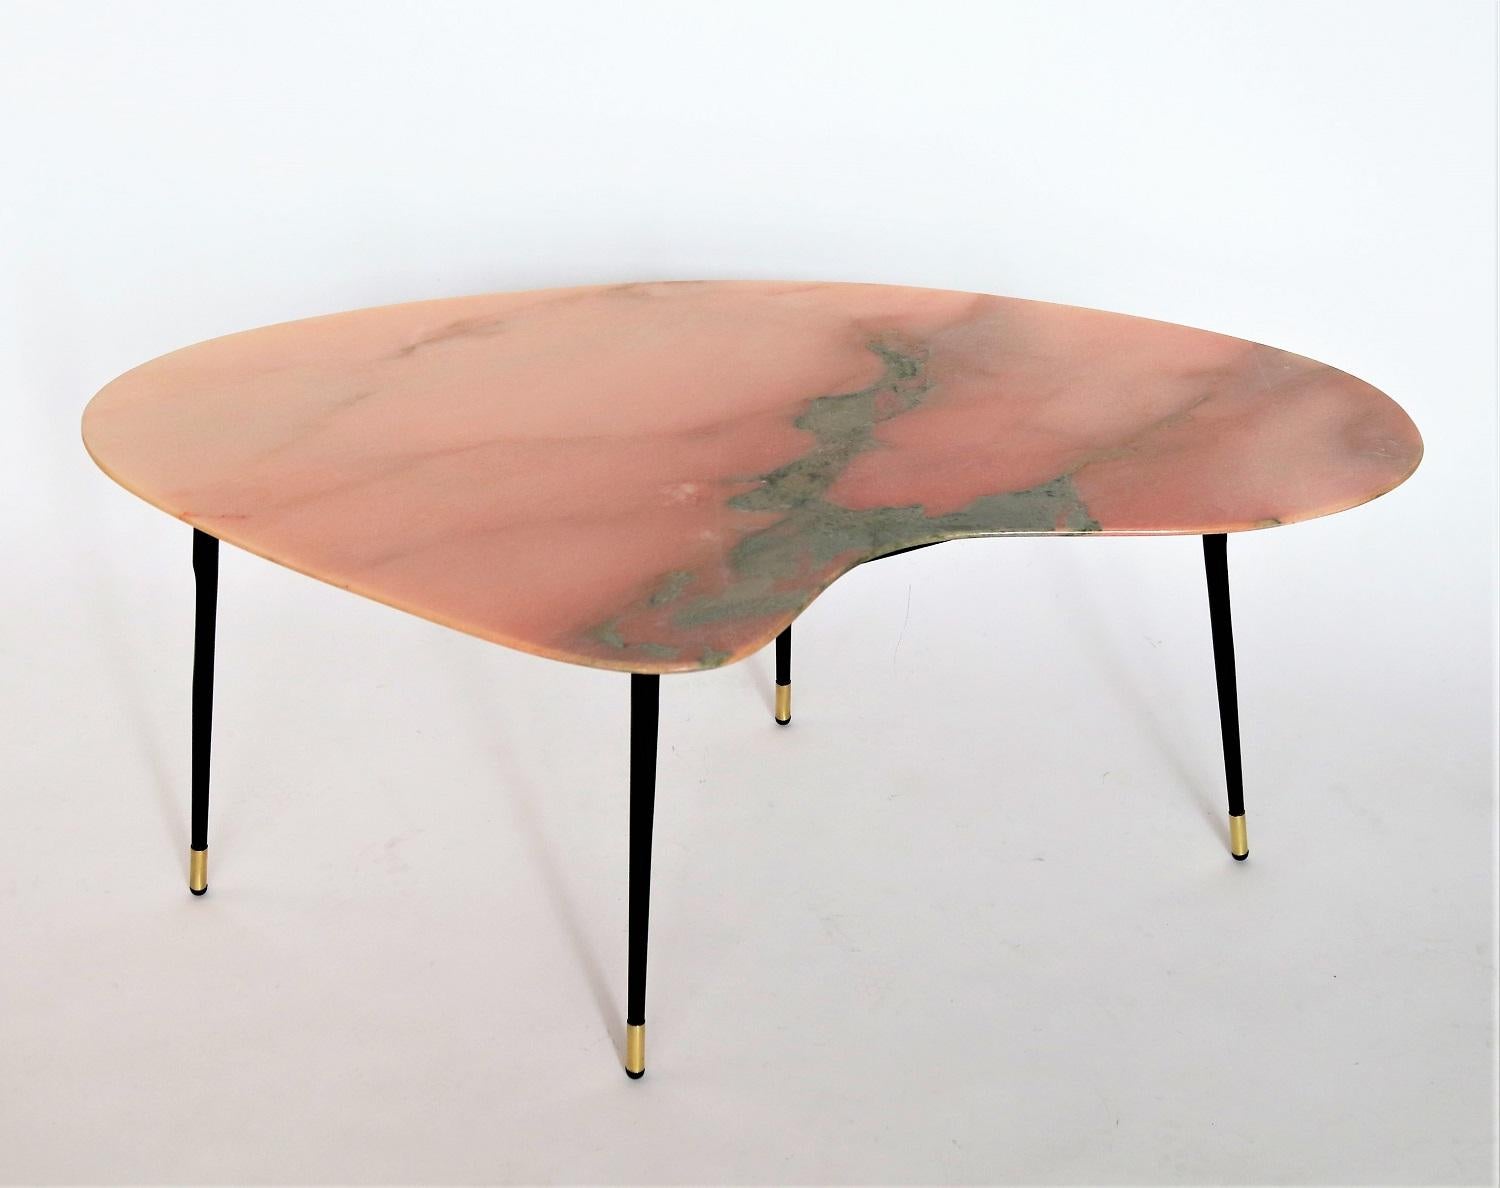 Beautiful coffee table with gorgeous elegant pink and green marble top and metallic legs with brass tips.
Made in Italy during the 1950s.
The marble is called 